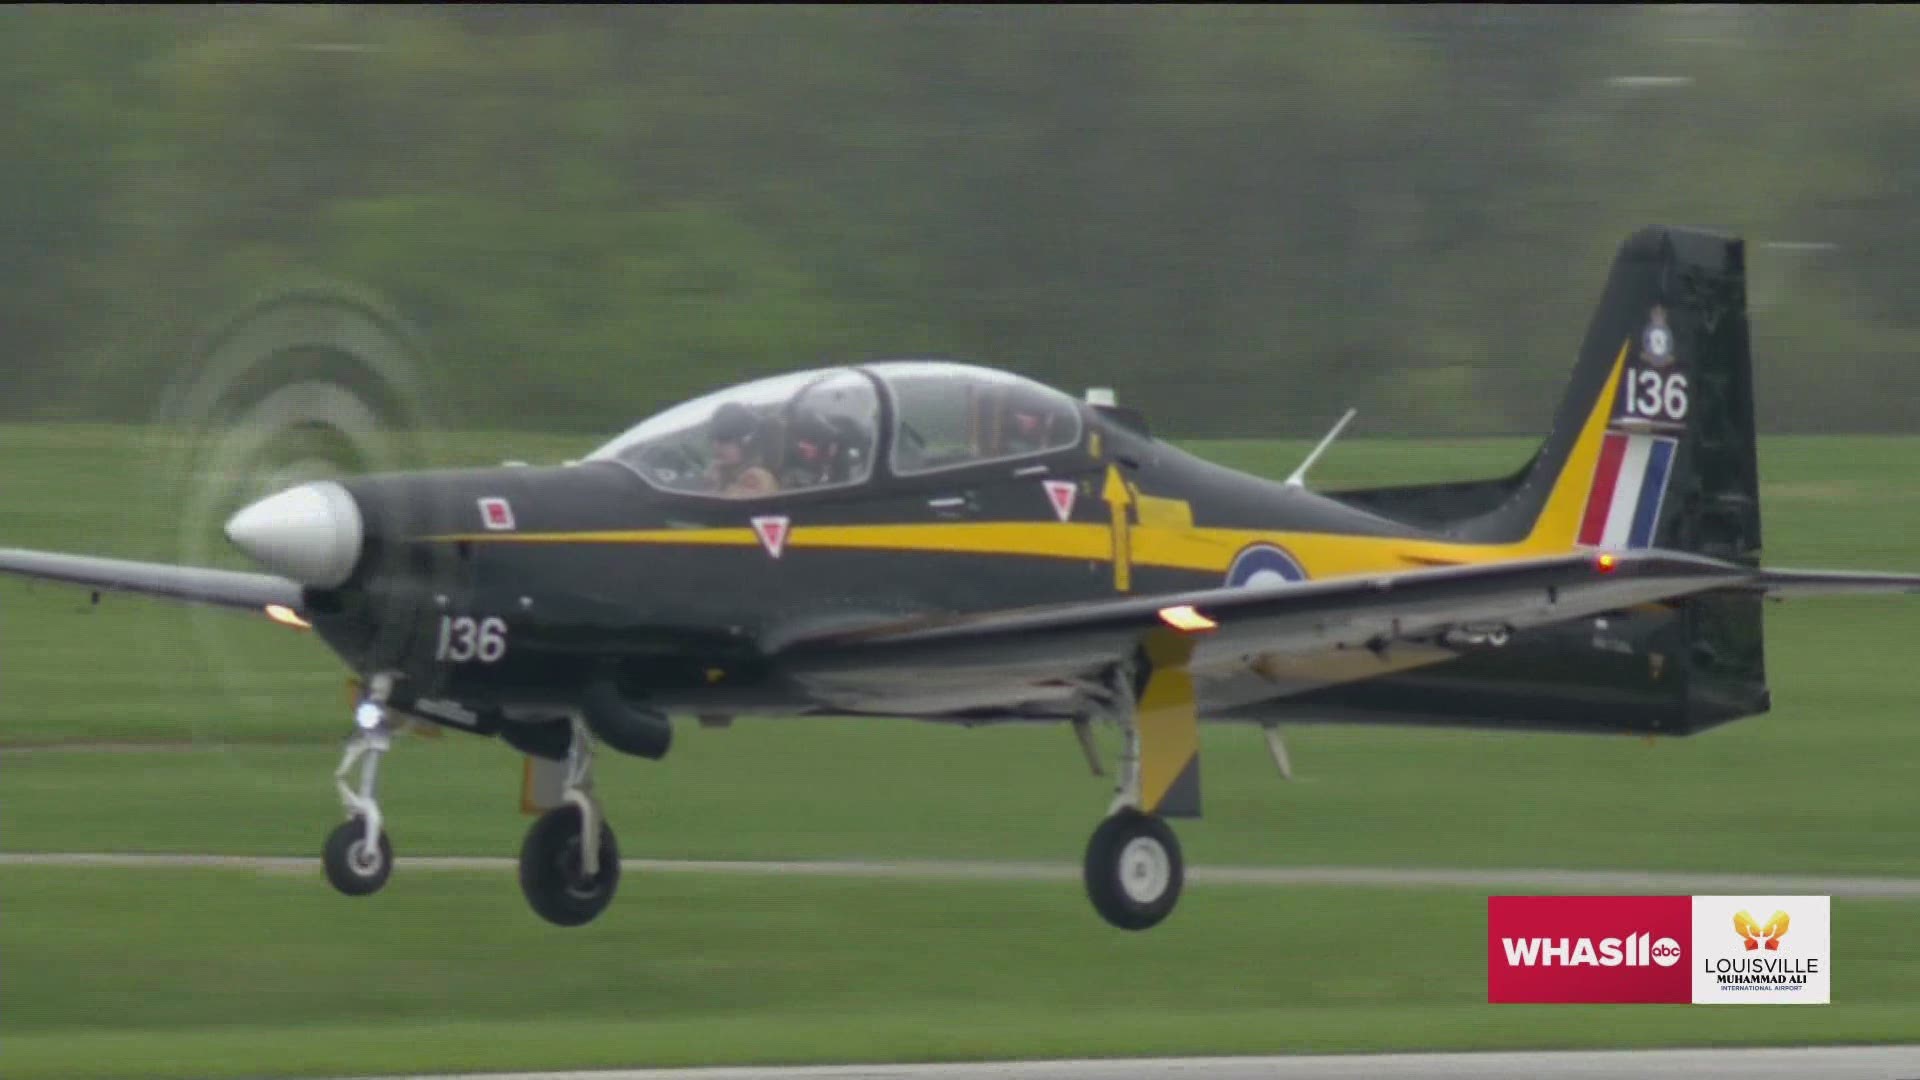 The man who trained Lee Leet pays tribute to him by flying the Tucano in Thunder Over Louisville 2021 Air Show.